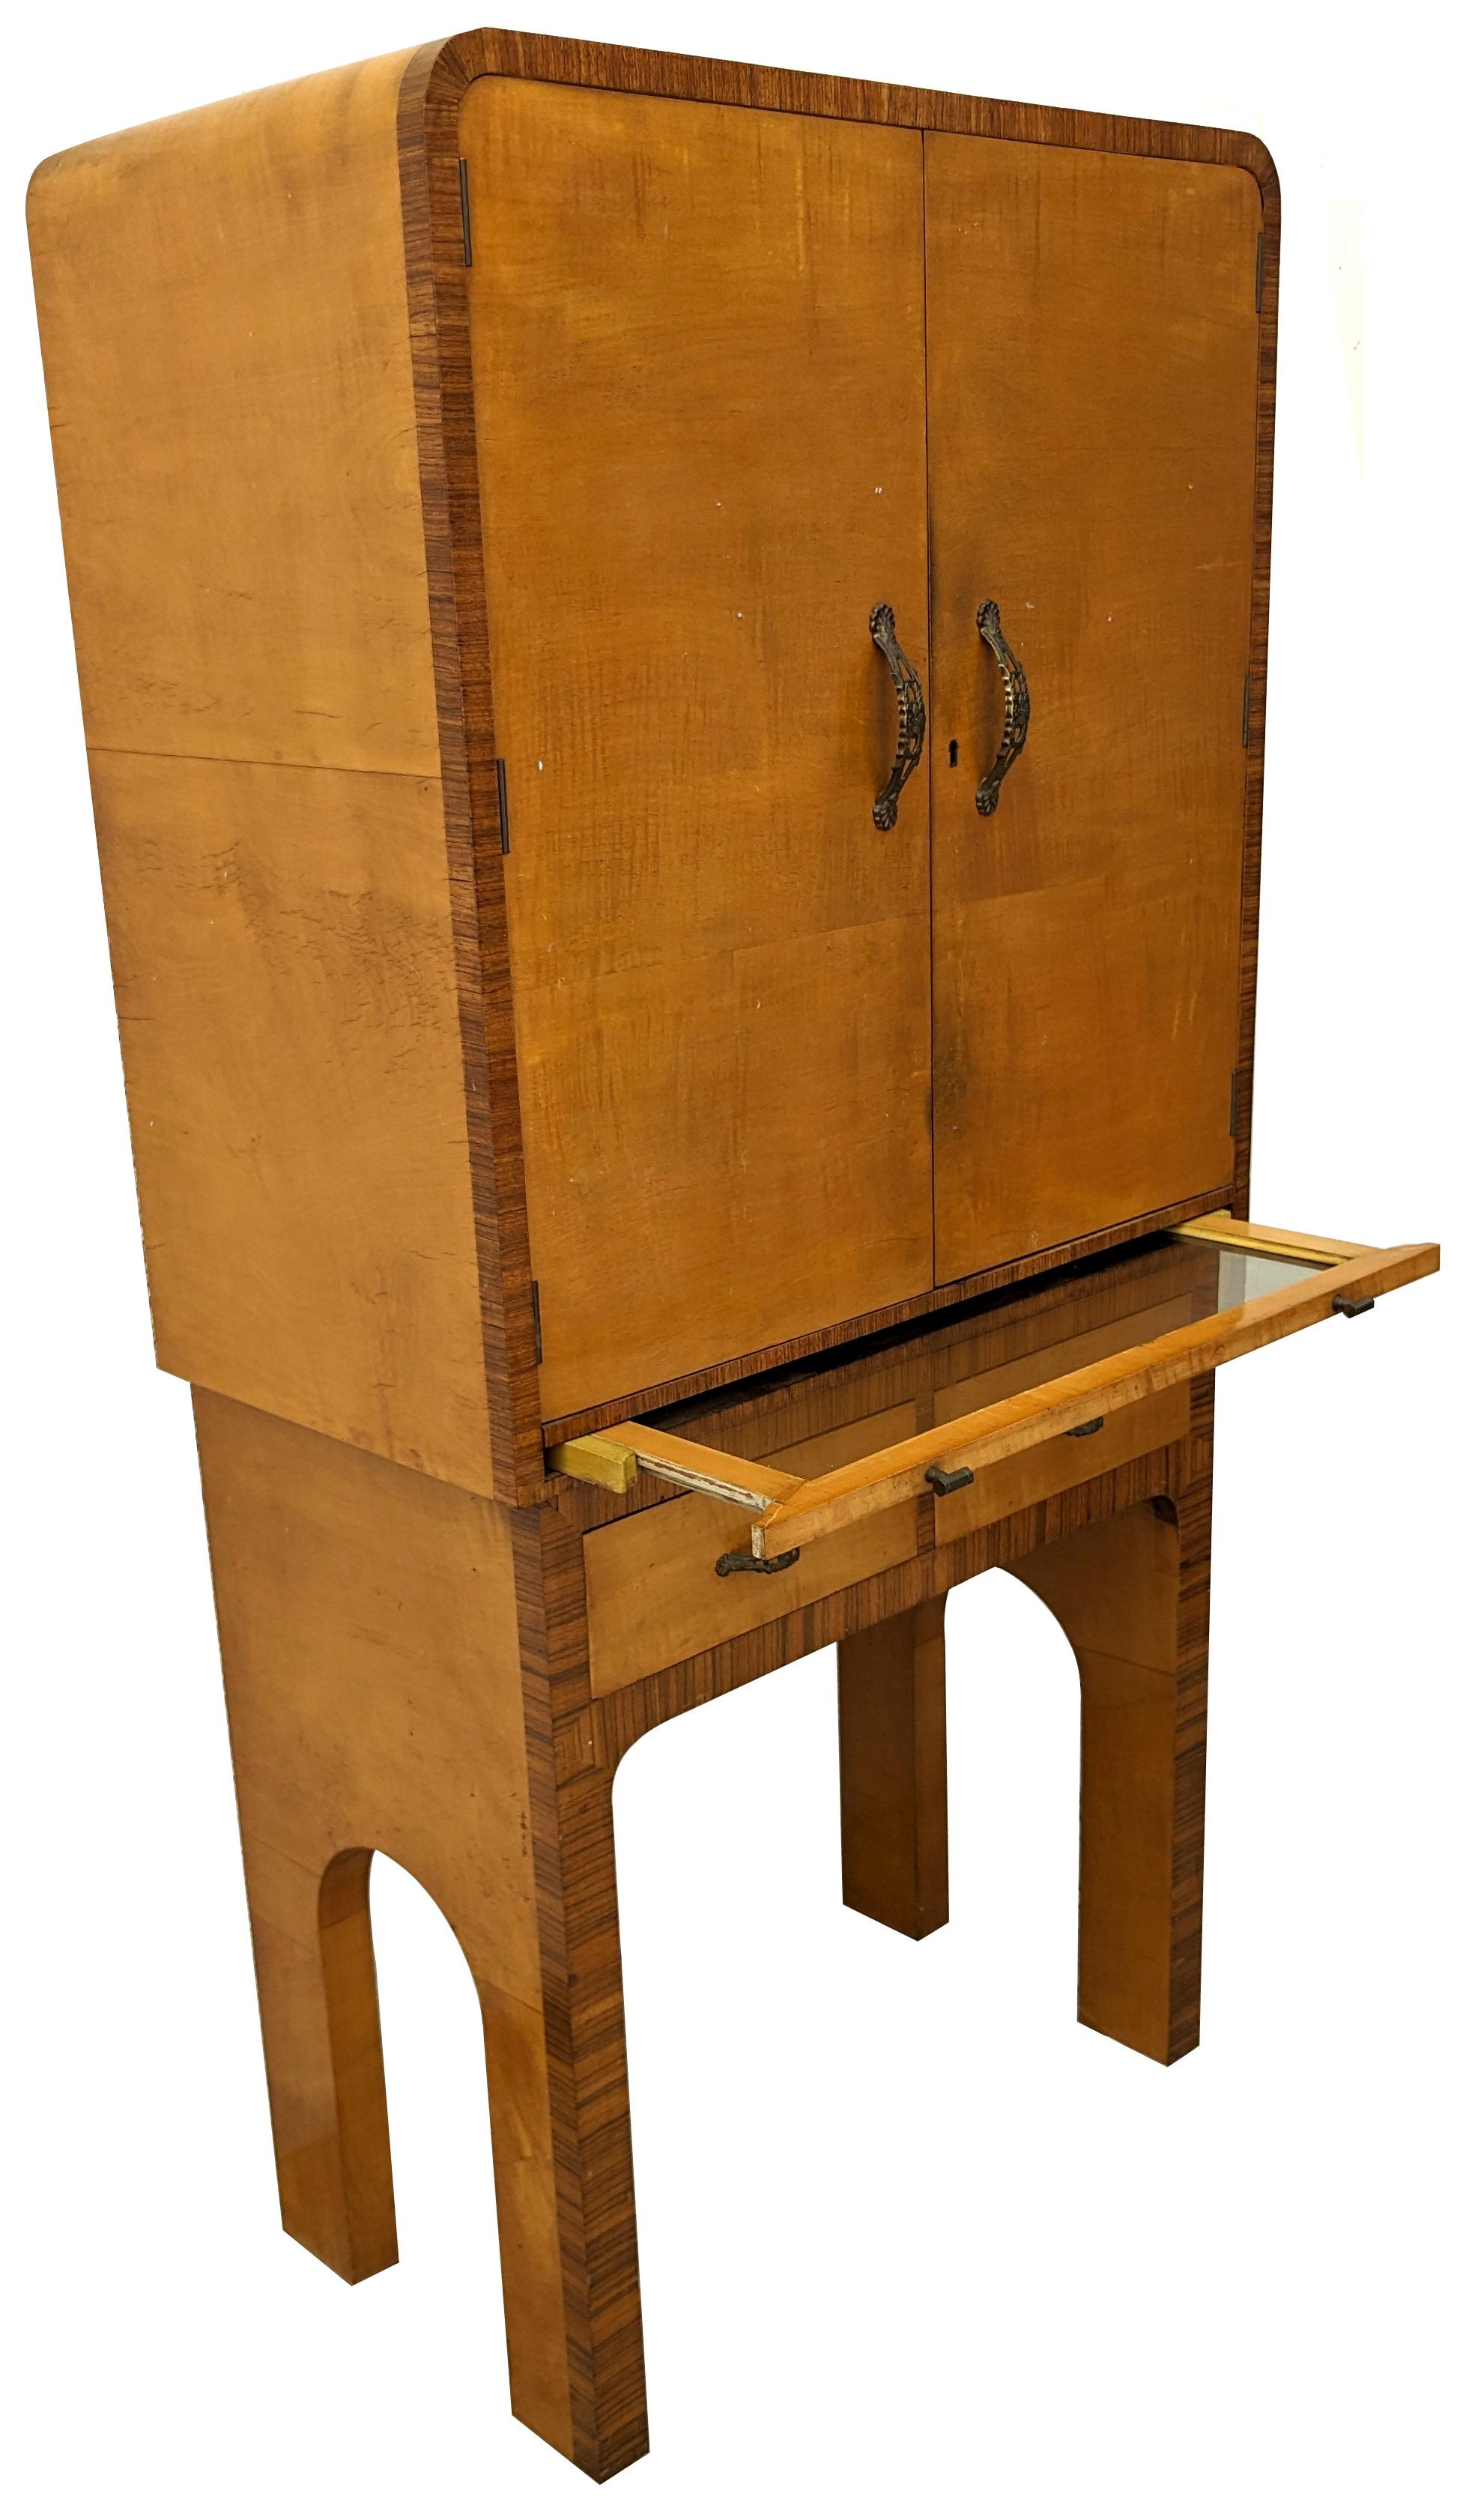 Art Deco Satinwood High End Cocktail Cabinet By Epstein Brothers, c1930 For Sale 2